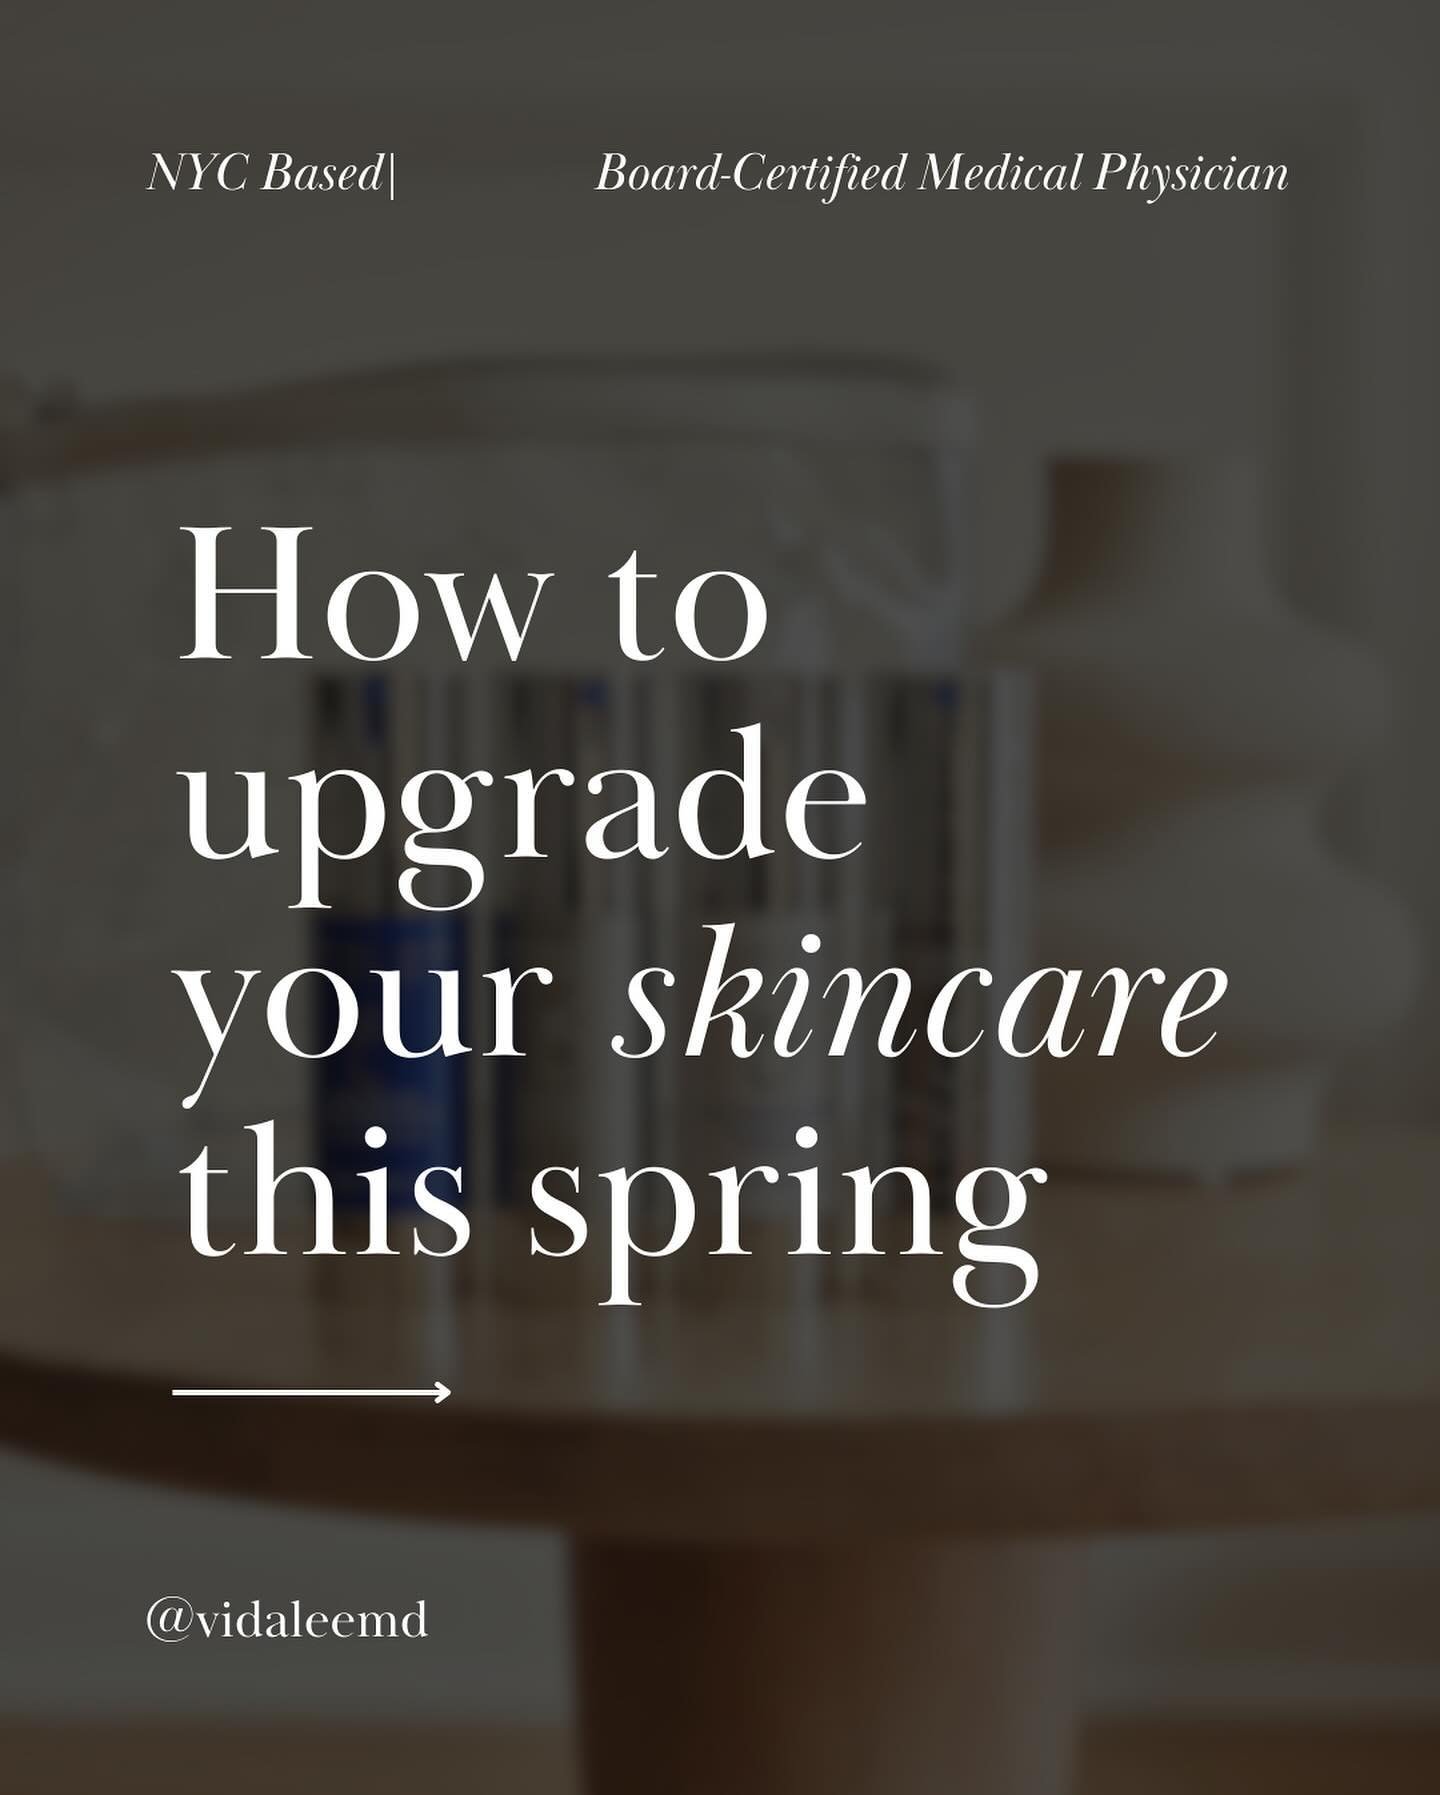 Medical Grade Skincare For The Win! 🙌🏼⁠
⁠
We all want to wear less makeup during the warmer months, and having clear and glowing skin gives you the confidence to do so.⁠
⁠
So, as you enter peak brunch season, here are my recommendations for upgradi